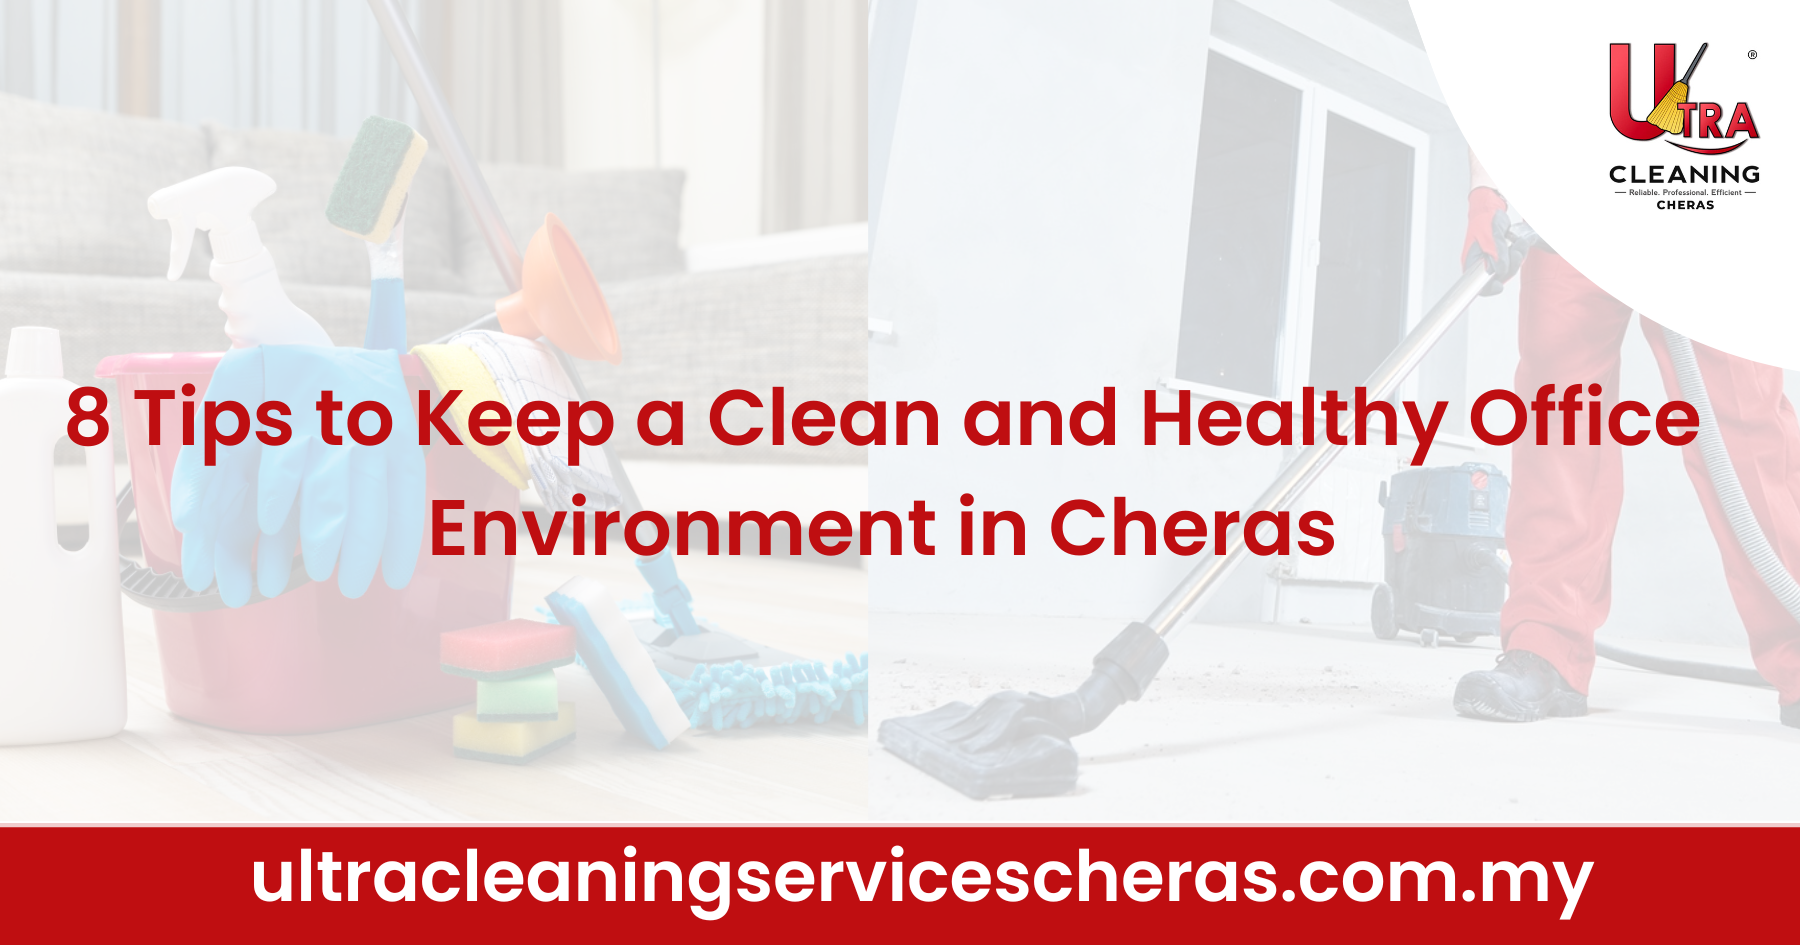 8 Tips to Keep a Clean and Healthy Office Environment in Cheras